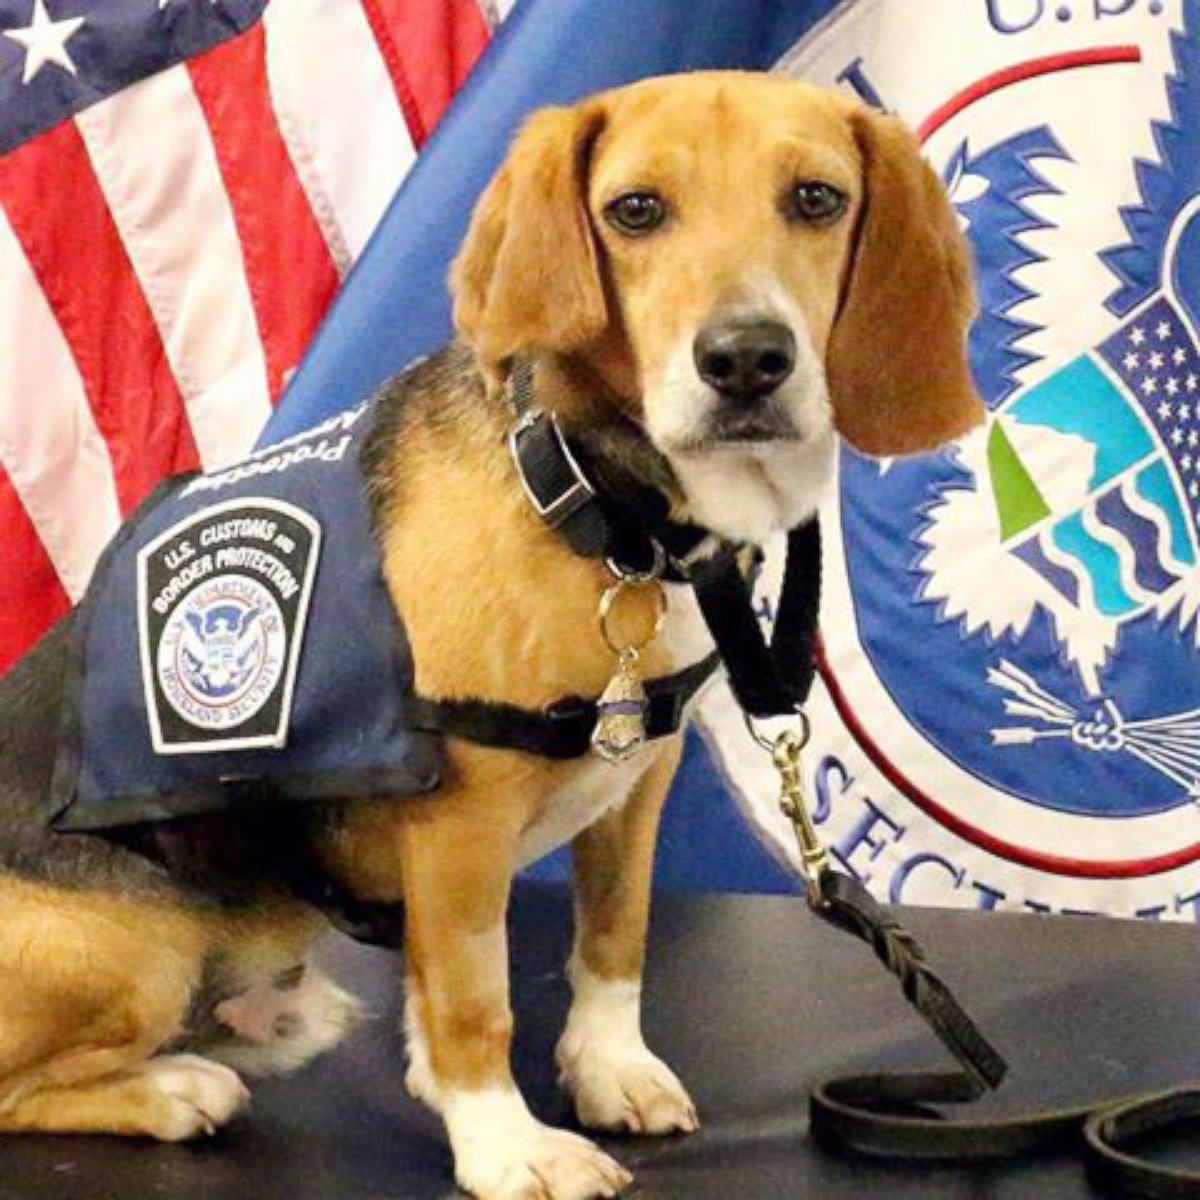 PHOTO: Murray is a beagle who suffered abuse before coming to a Georgia Shelter, and is now starting a career with the Hartsfield Jackson Atlanta Airport.